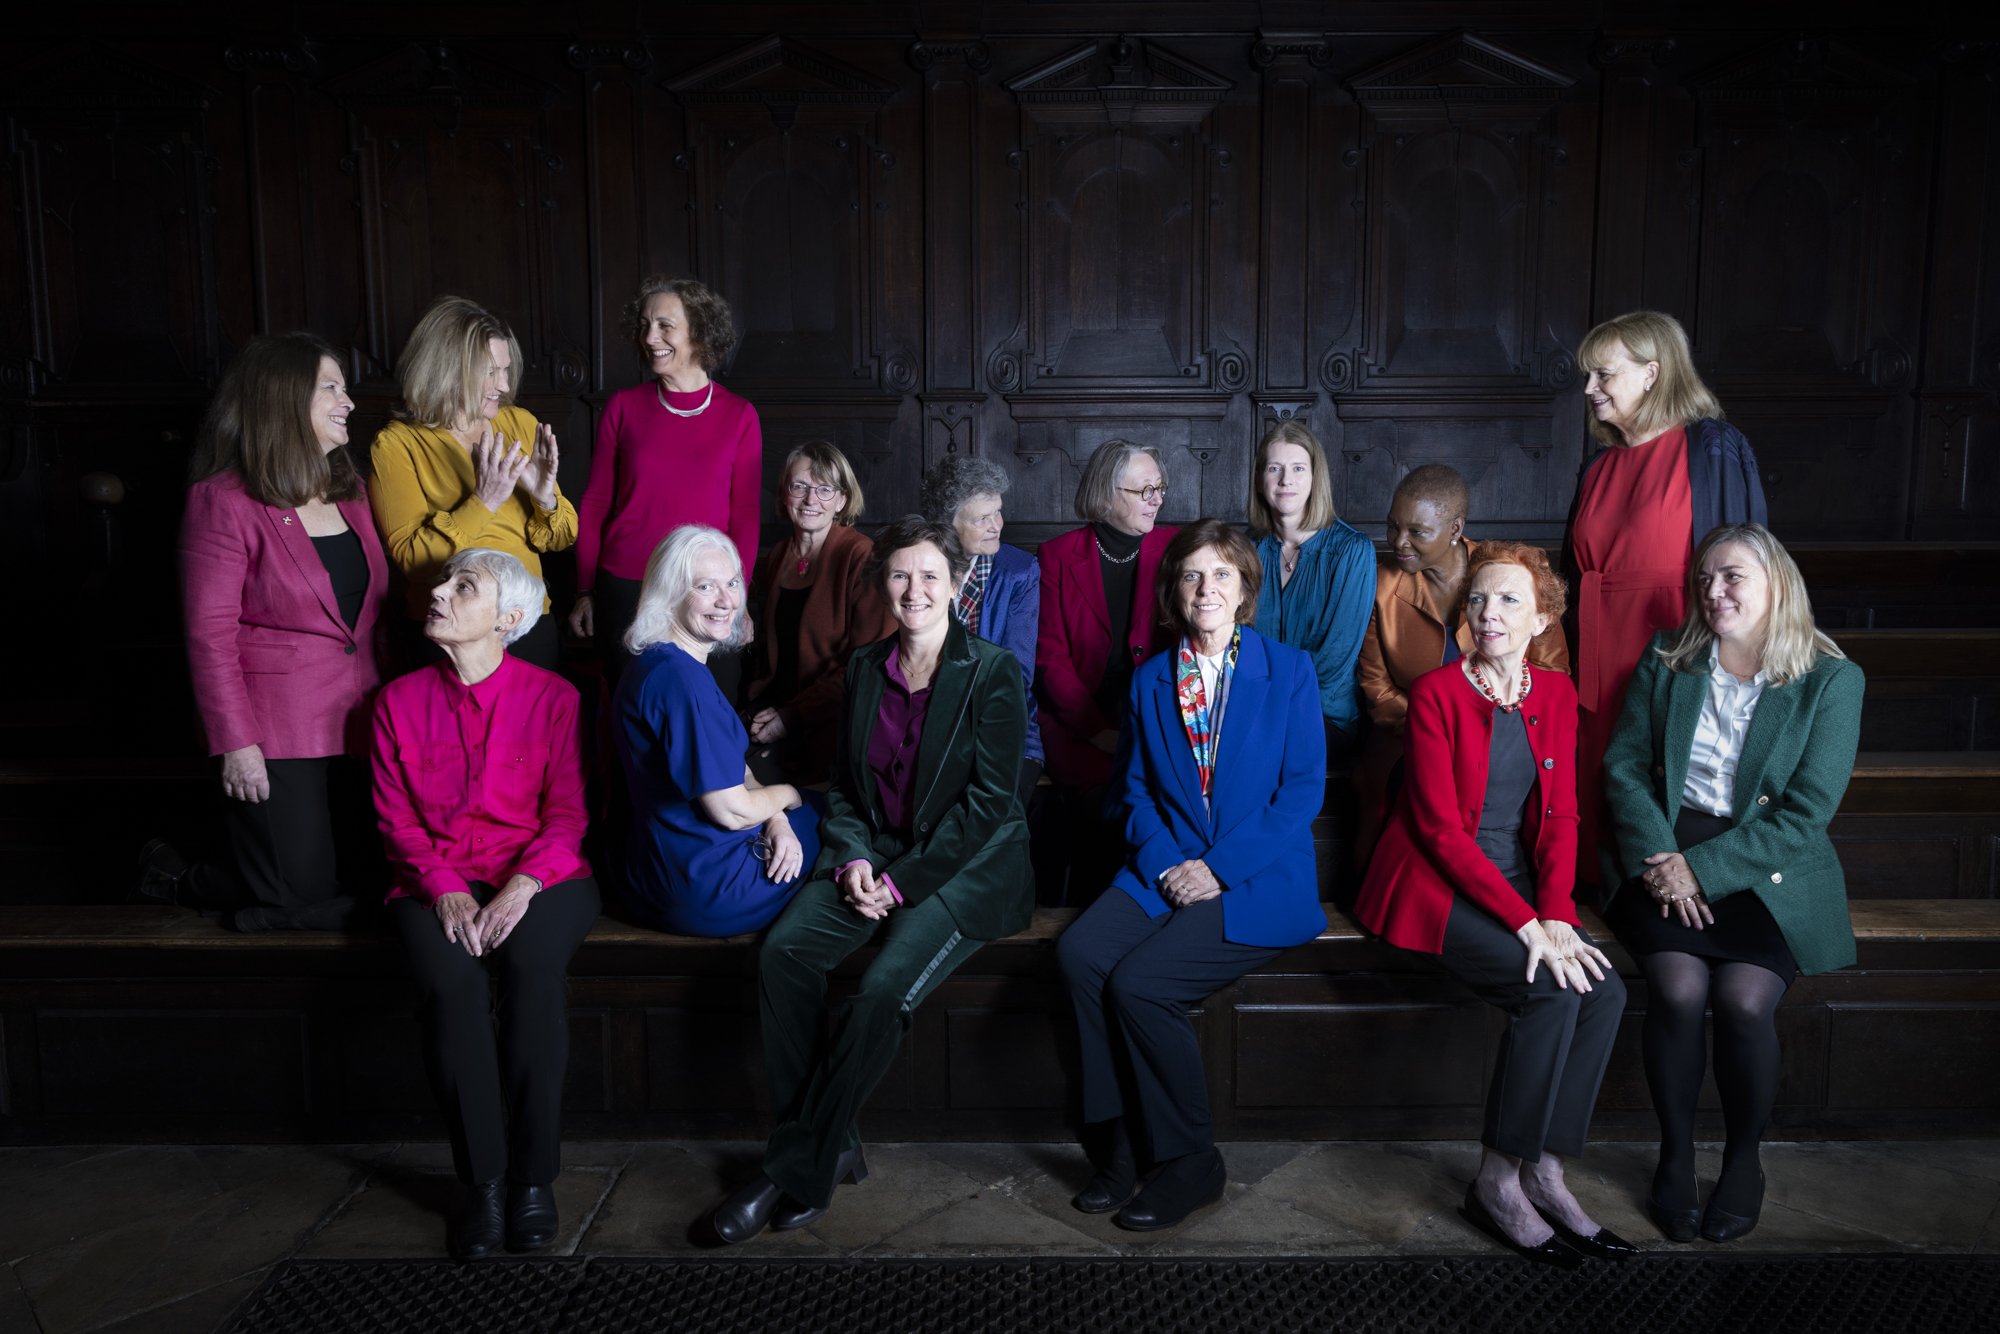 Portrait to celebrate the Centenary of Matriculation of Women at Oxford University